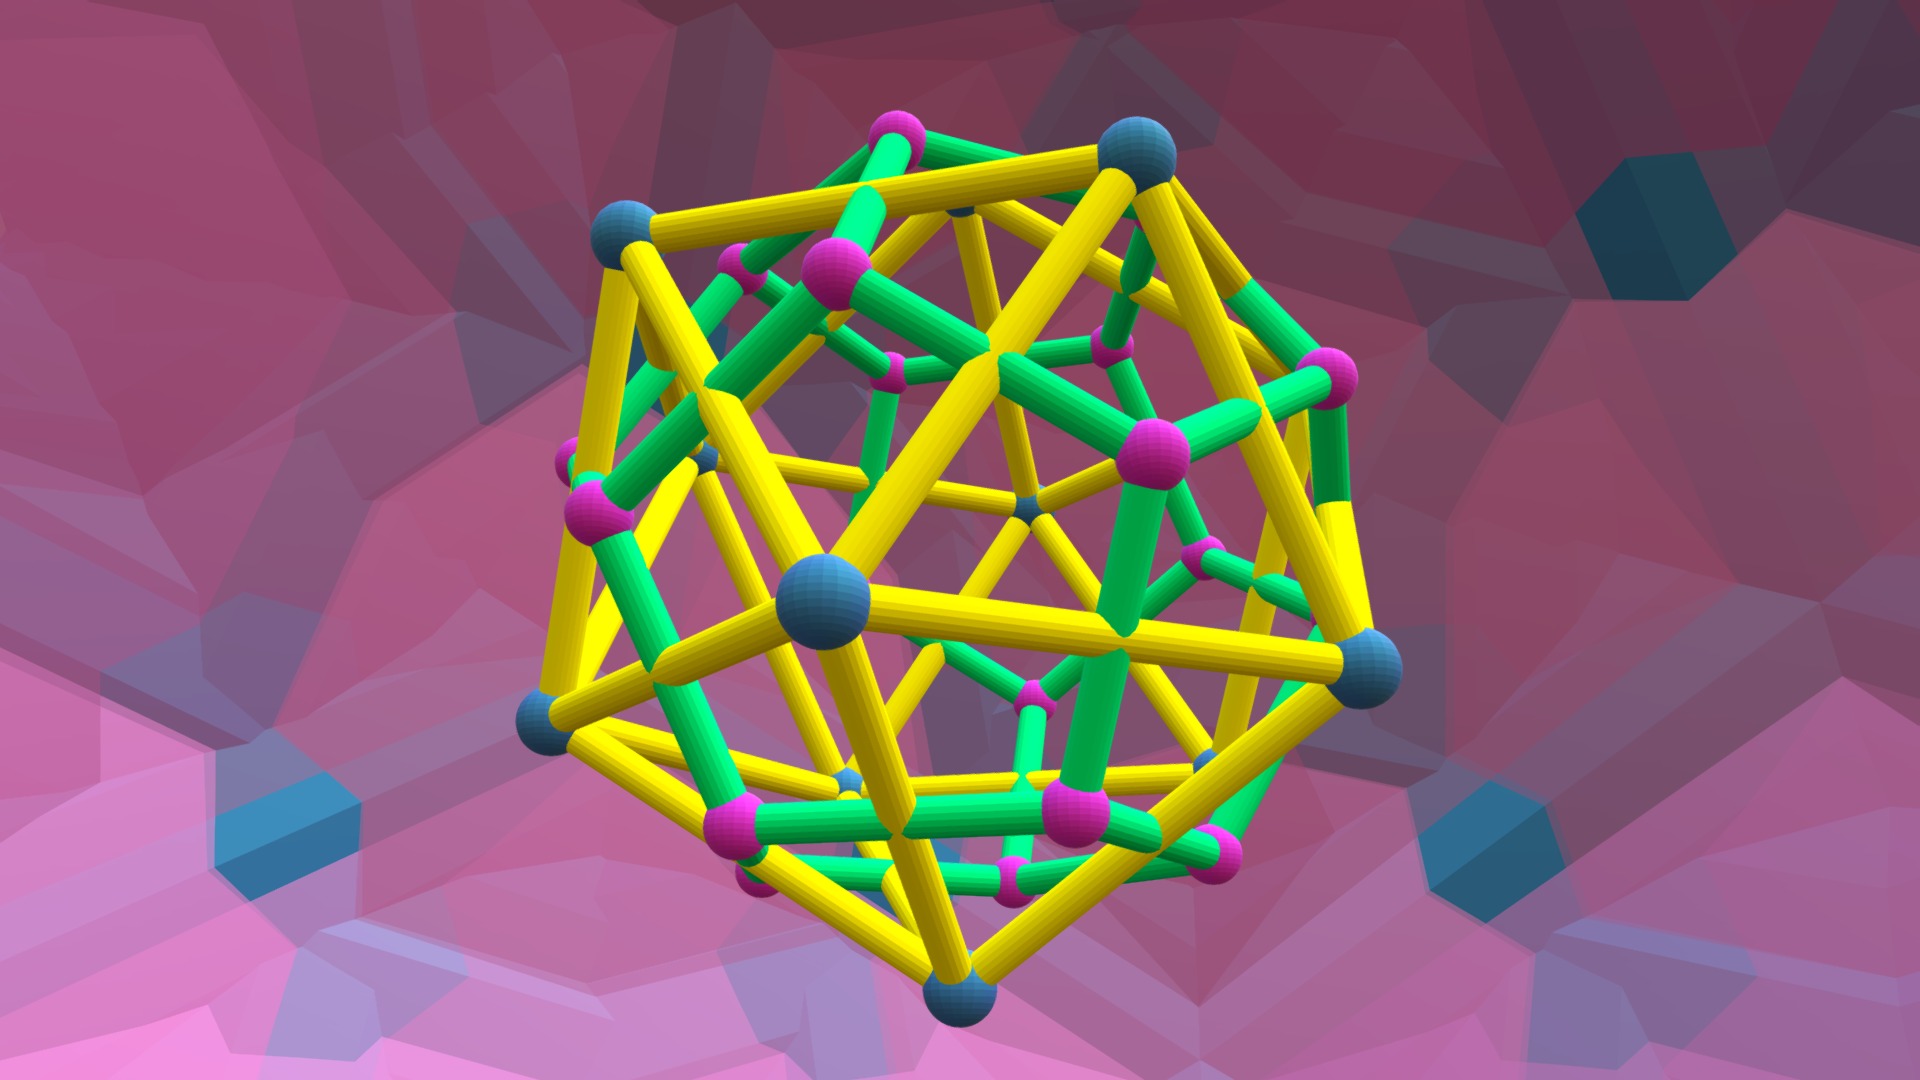 3D model a dual inside five icosahedra - This is a 3D model of the a dual inside five icosahedra. The 3D model is about a colorful design on a purple background.